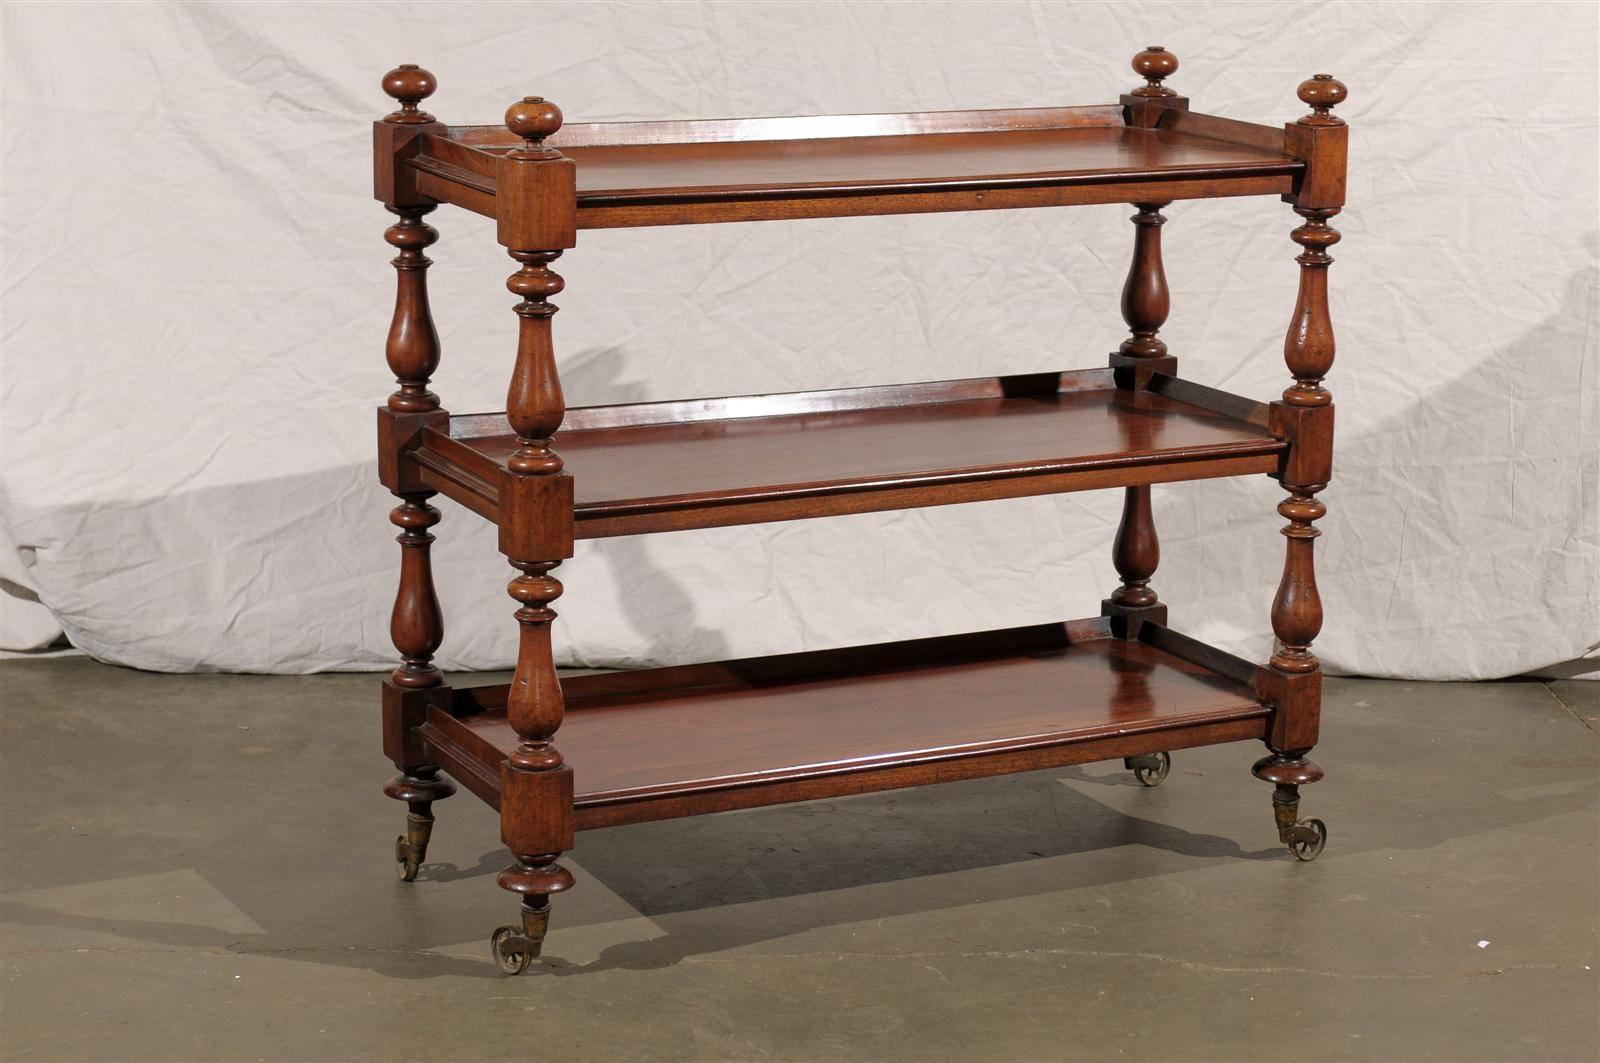 Early 19th century English Regency mahogany étagère, great color.